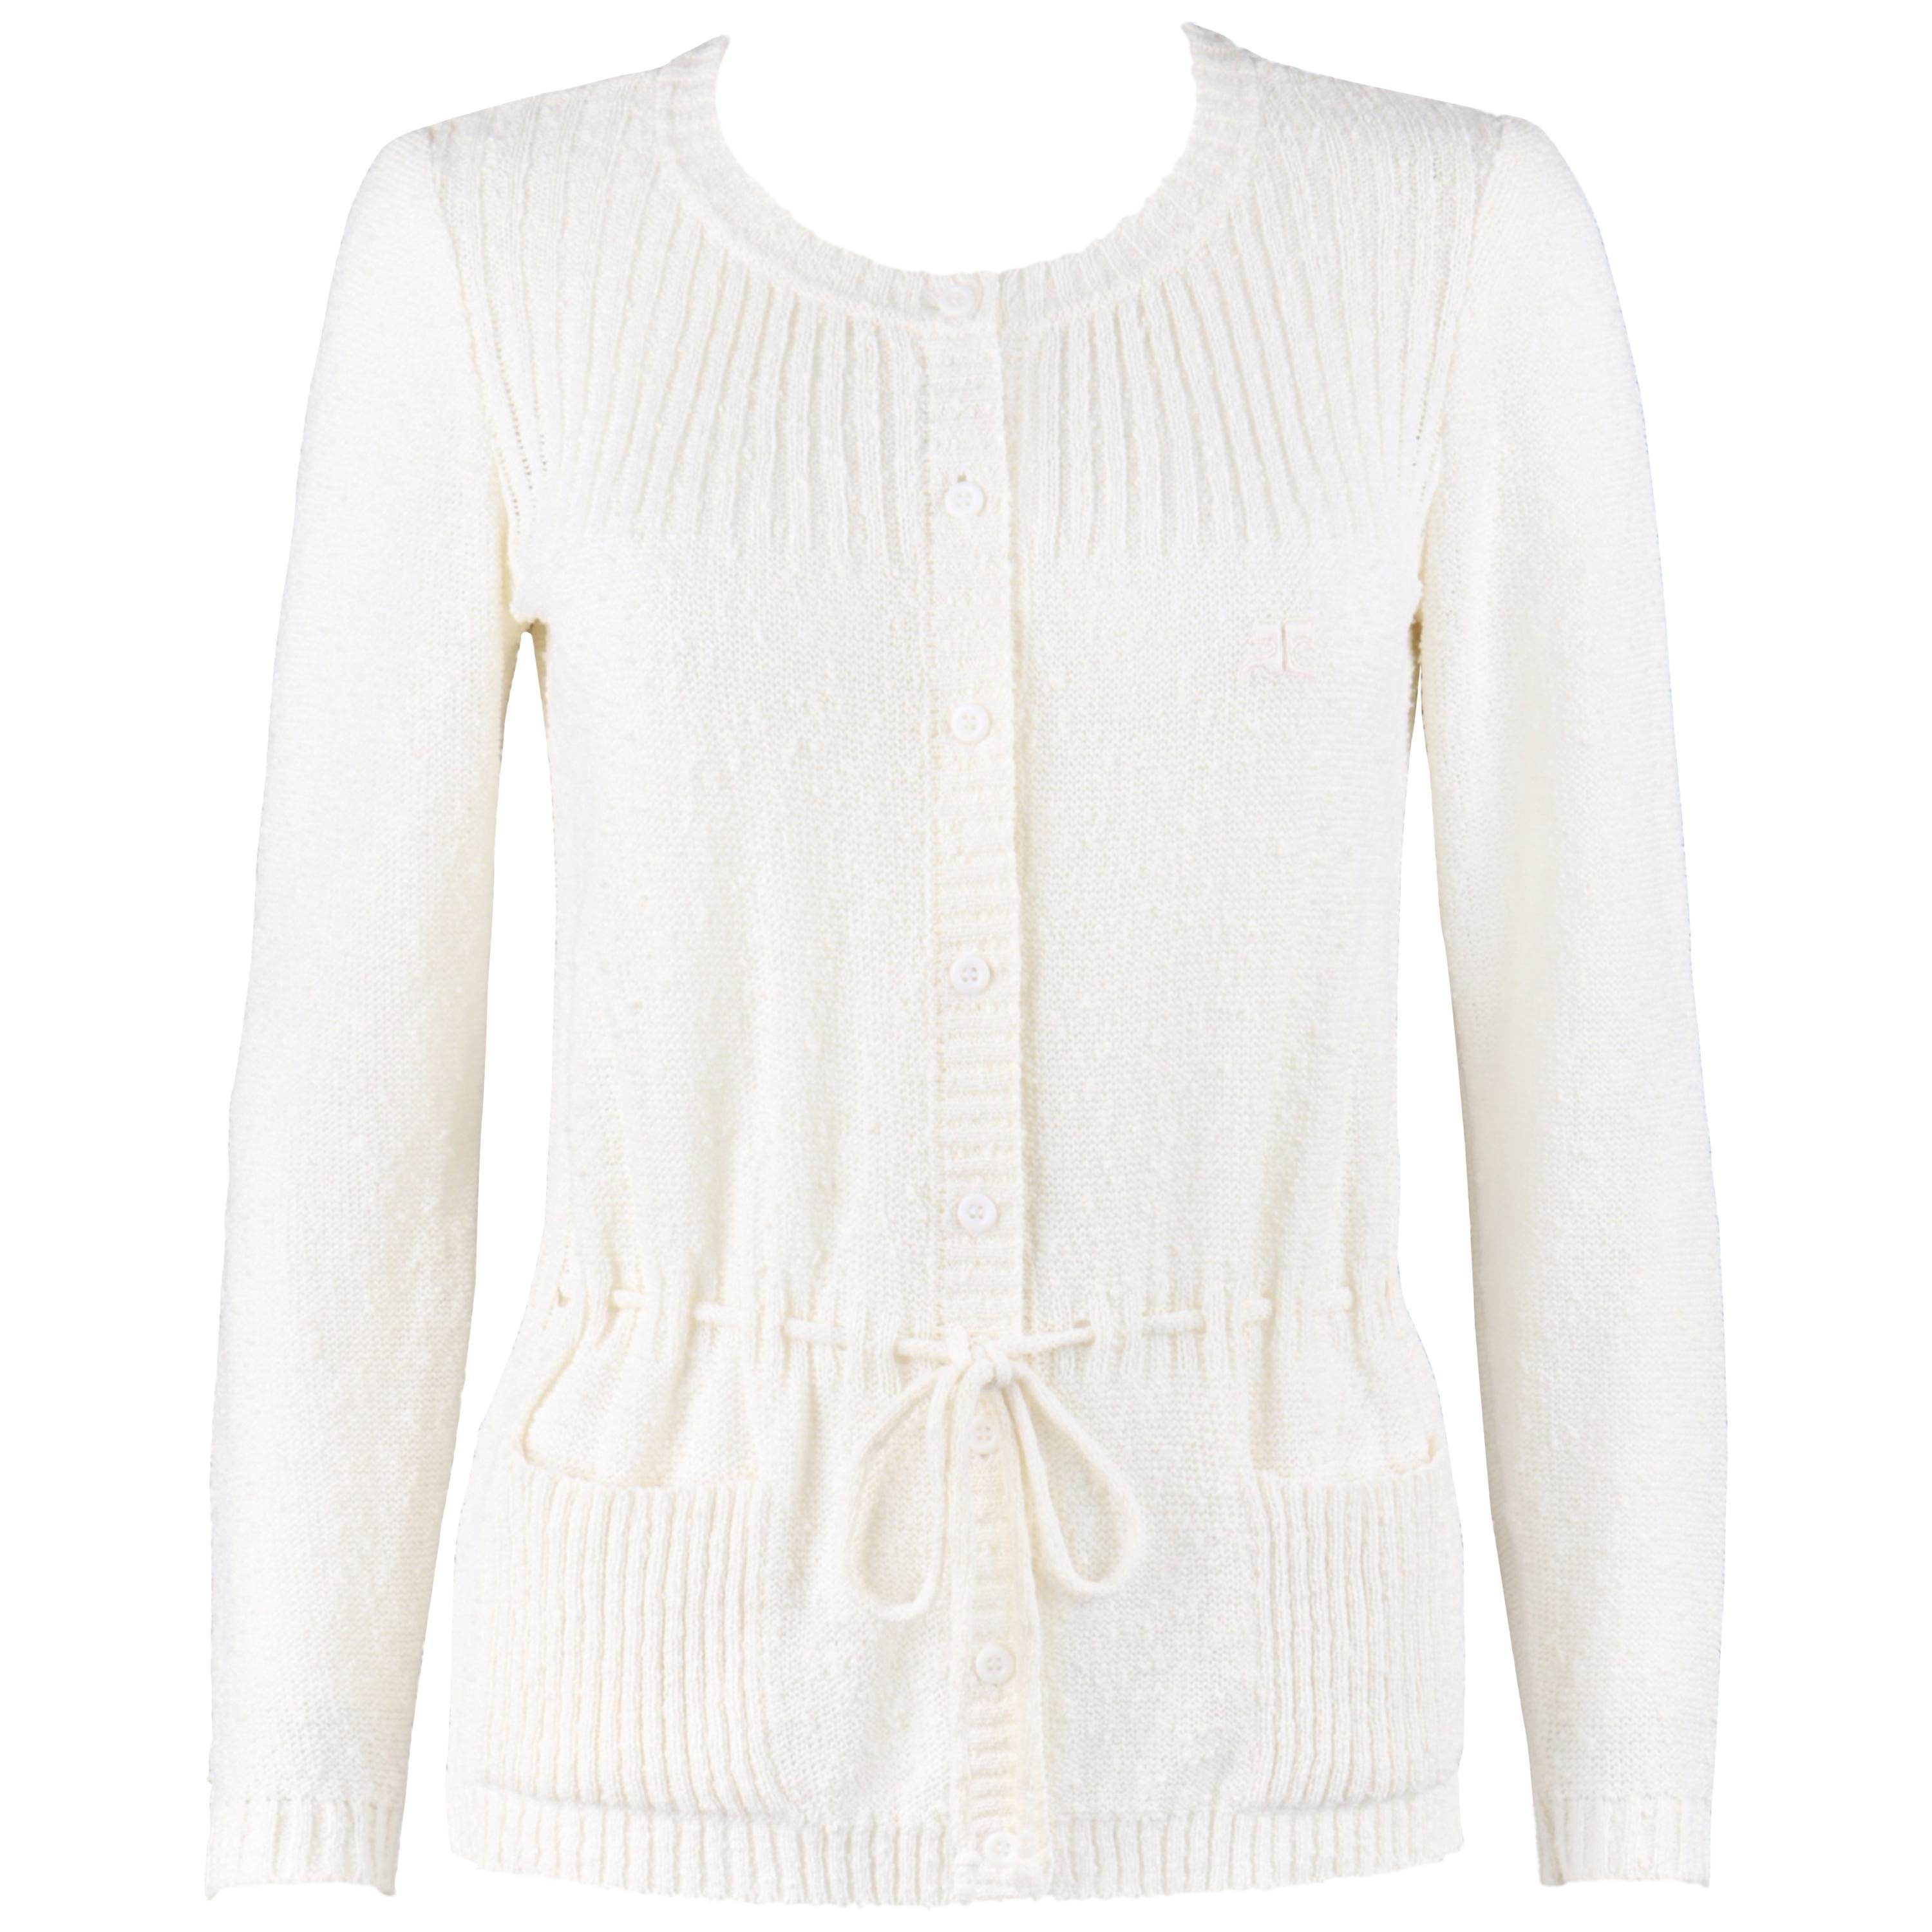 COURREGES c.1970-1980's Ivory Slub Knit Button-Up Long Sleeve Cardigan Sweater For Sale